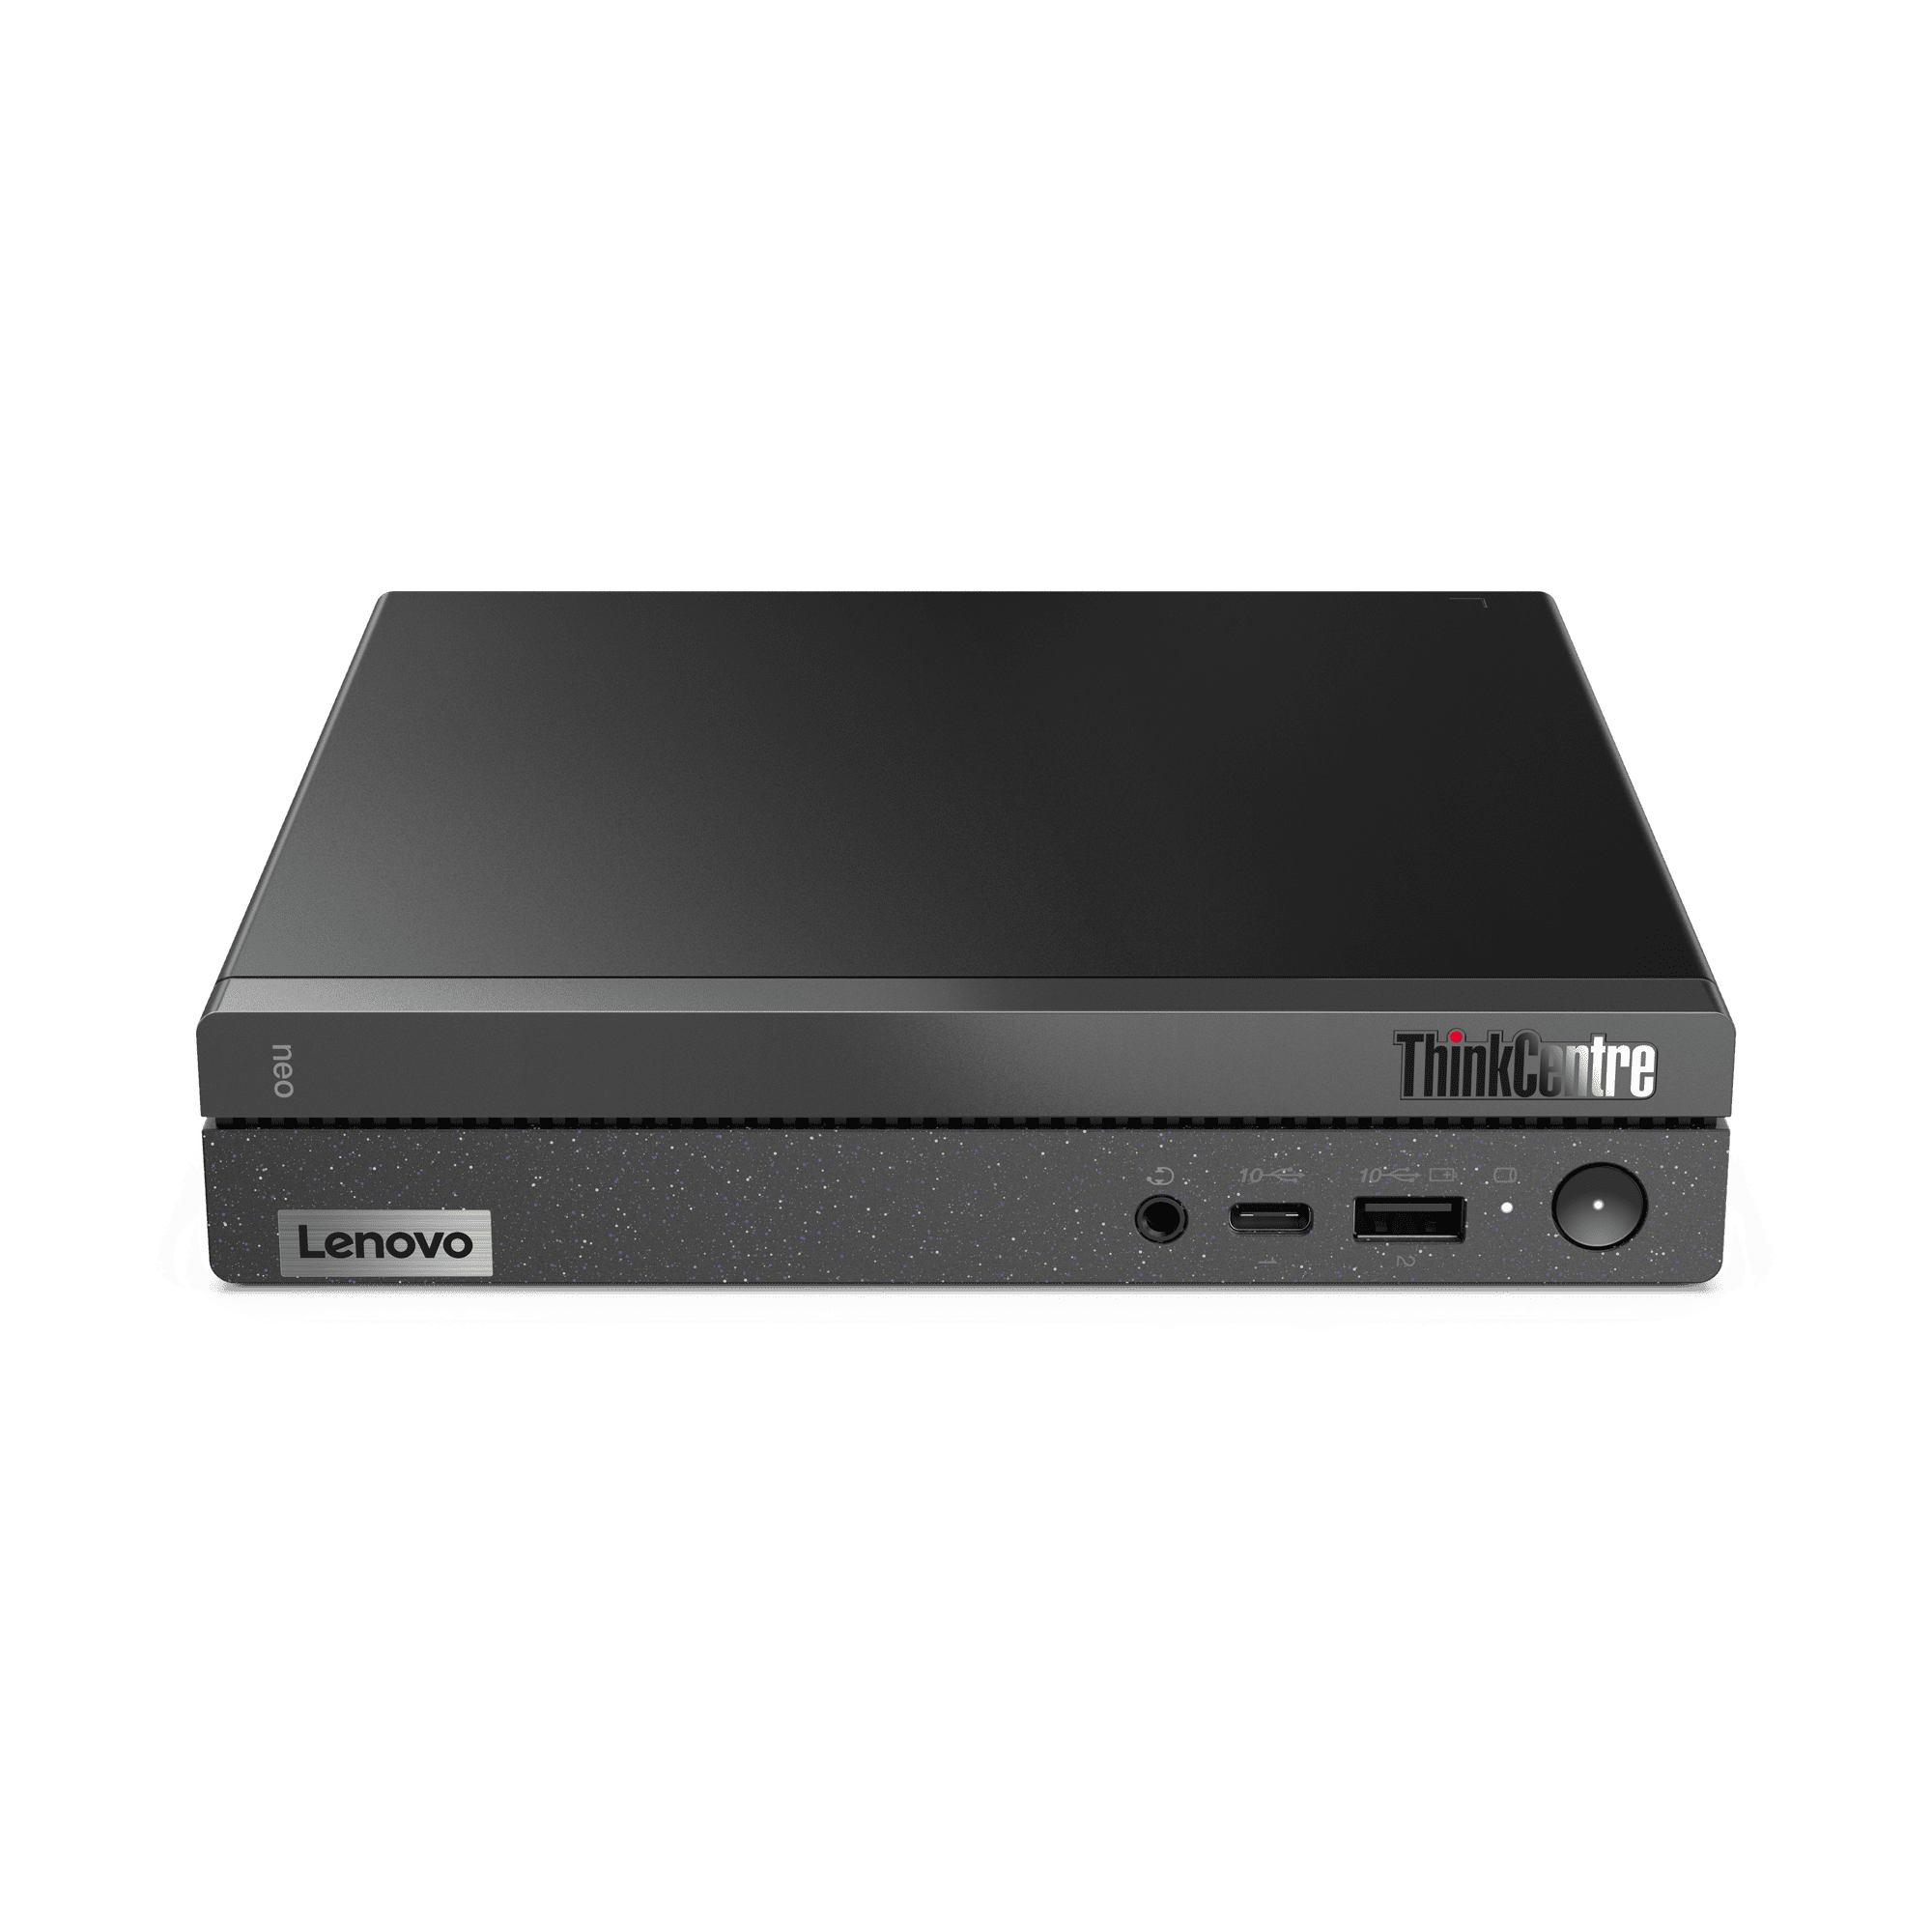 01_ThinkCentre_neo_50q_Hero_Front_Facing